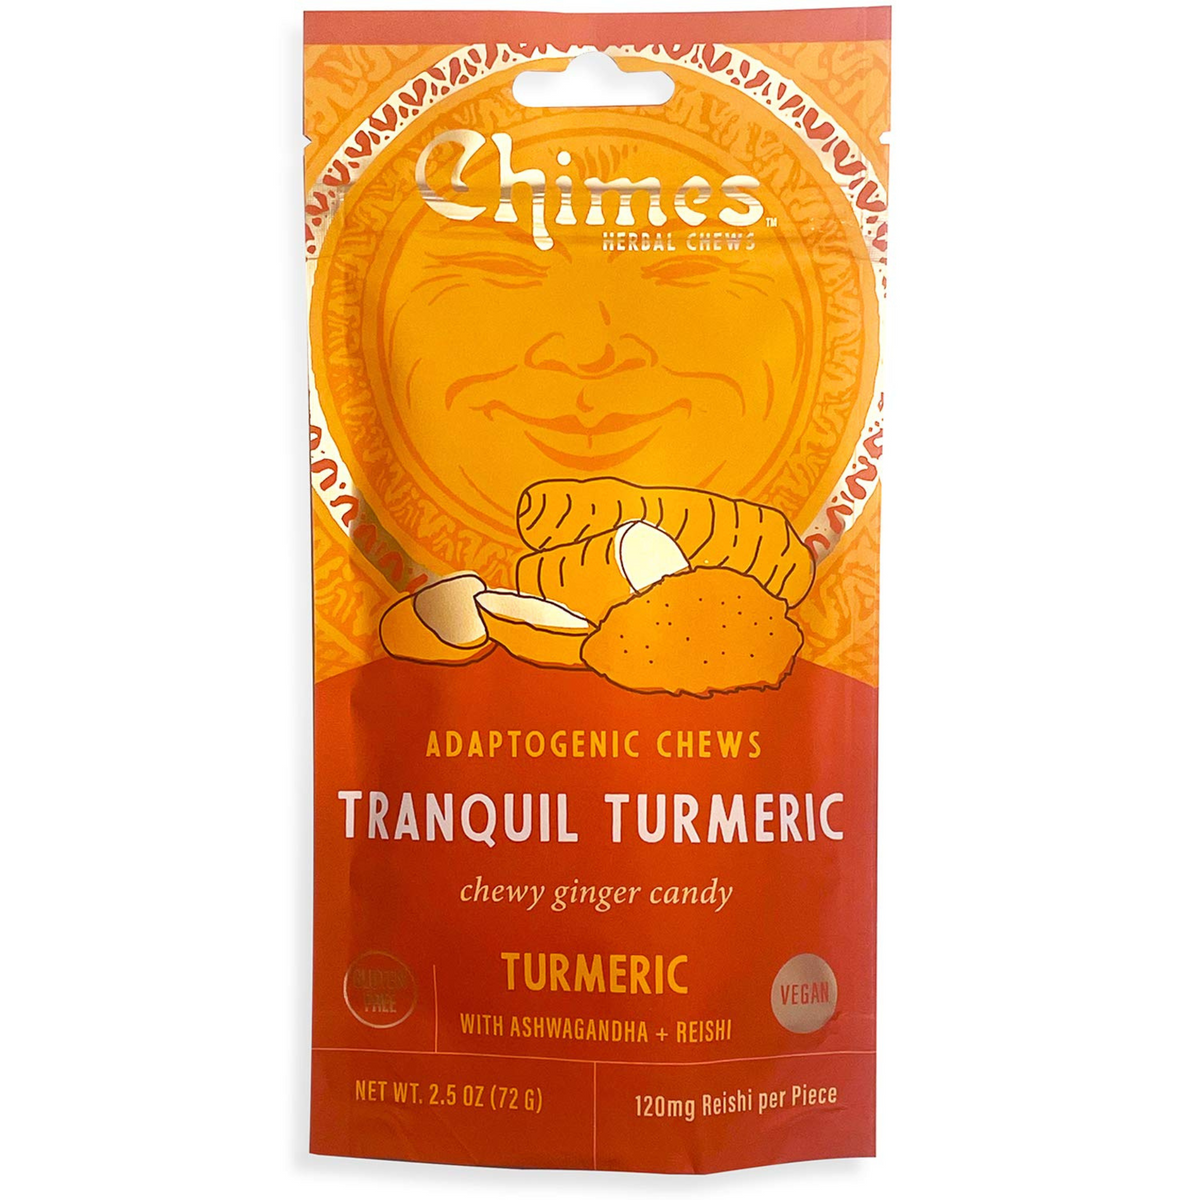 Primary Image of Chimes Tranquil Turmeric Adaptogenic Chews (2.5 oz)